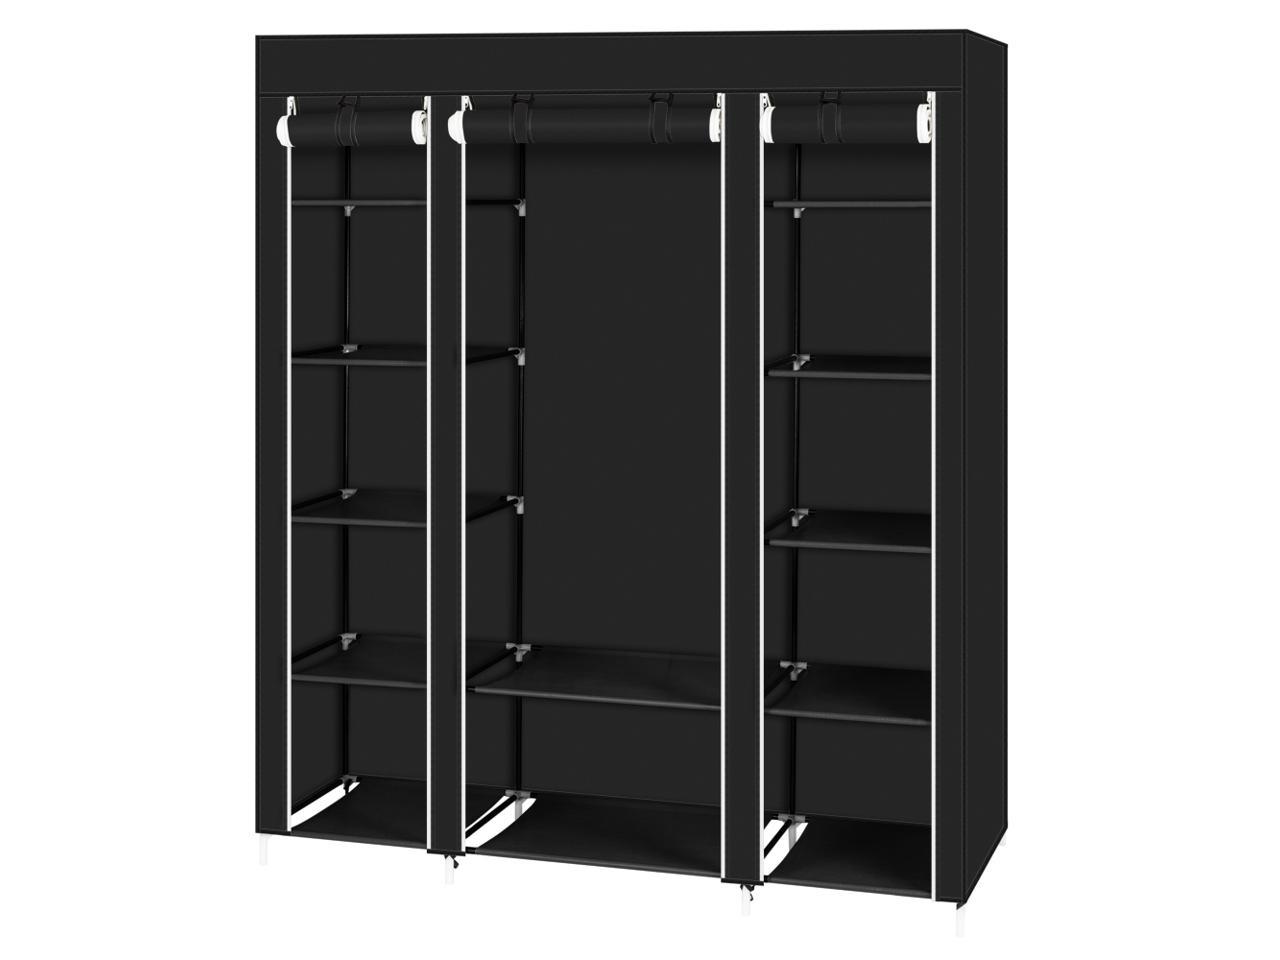 YOUUD Wardrobe Storage Closet Portable Closet Shelves Extra Strong and Durable 165x43x168cm Closet Storage Organizer Quick and Easy to Assemble